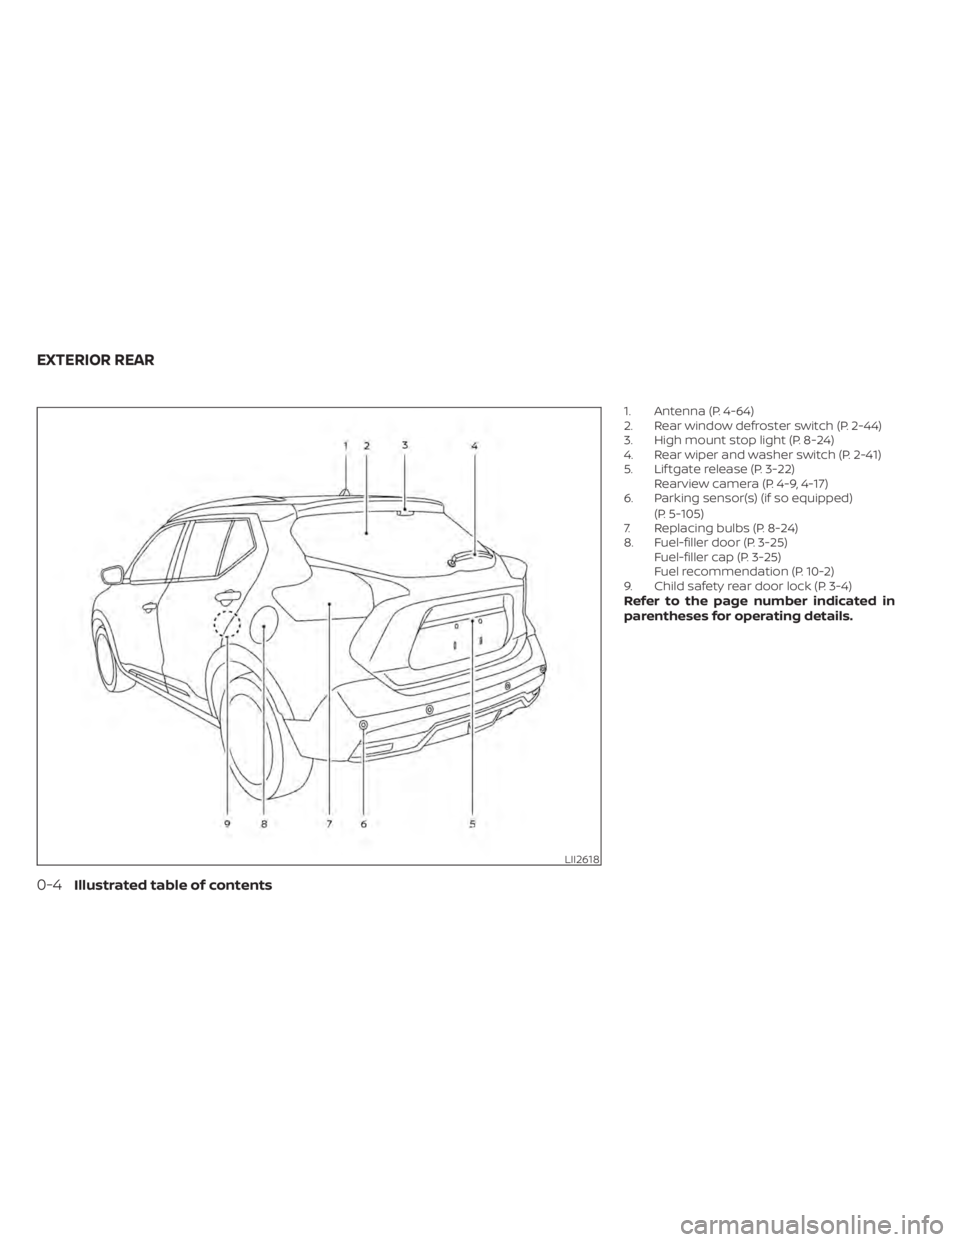 NISSAN KICKS 2021  Owners Manual 1. Antenna (P. 4-64)
2. Rear window defroster switch (P. 2-44)
3. High mount stop light (P. 8-24)
4. Rear wiper and washer switch (P. 2-41)
5. Lif tgate release (P. 3-22)Rearview camera (P. 4-9, 4-17)